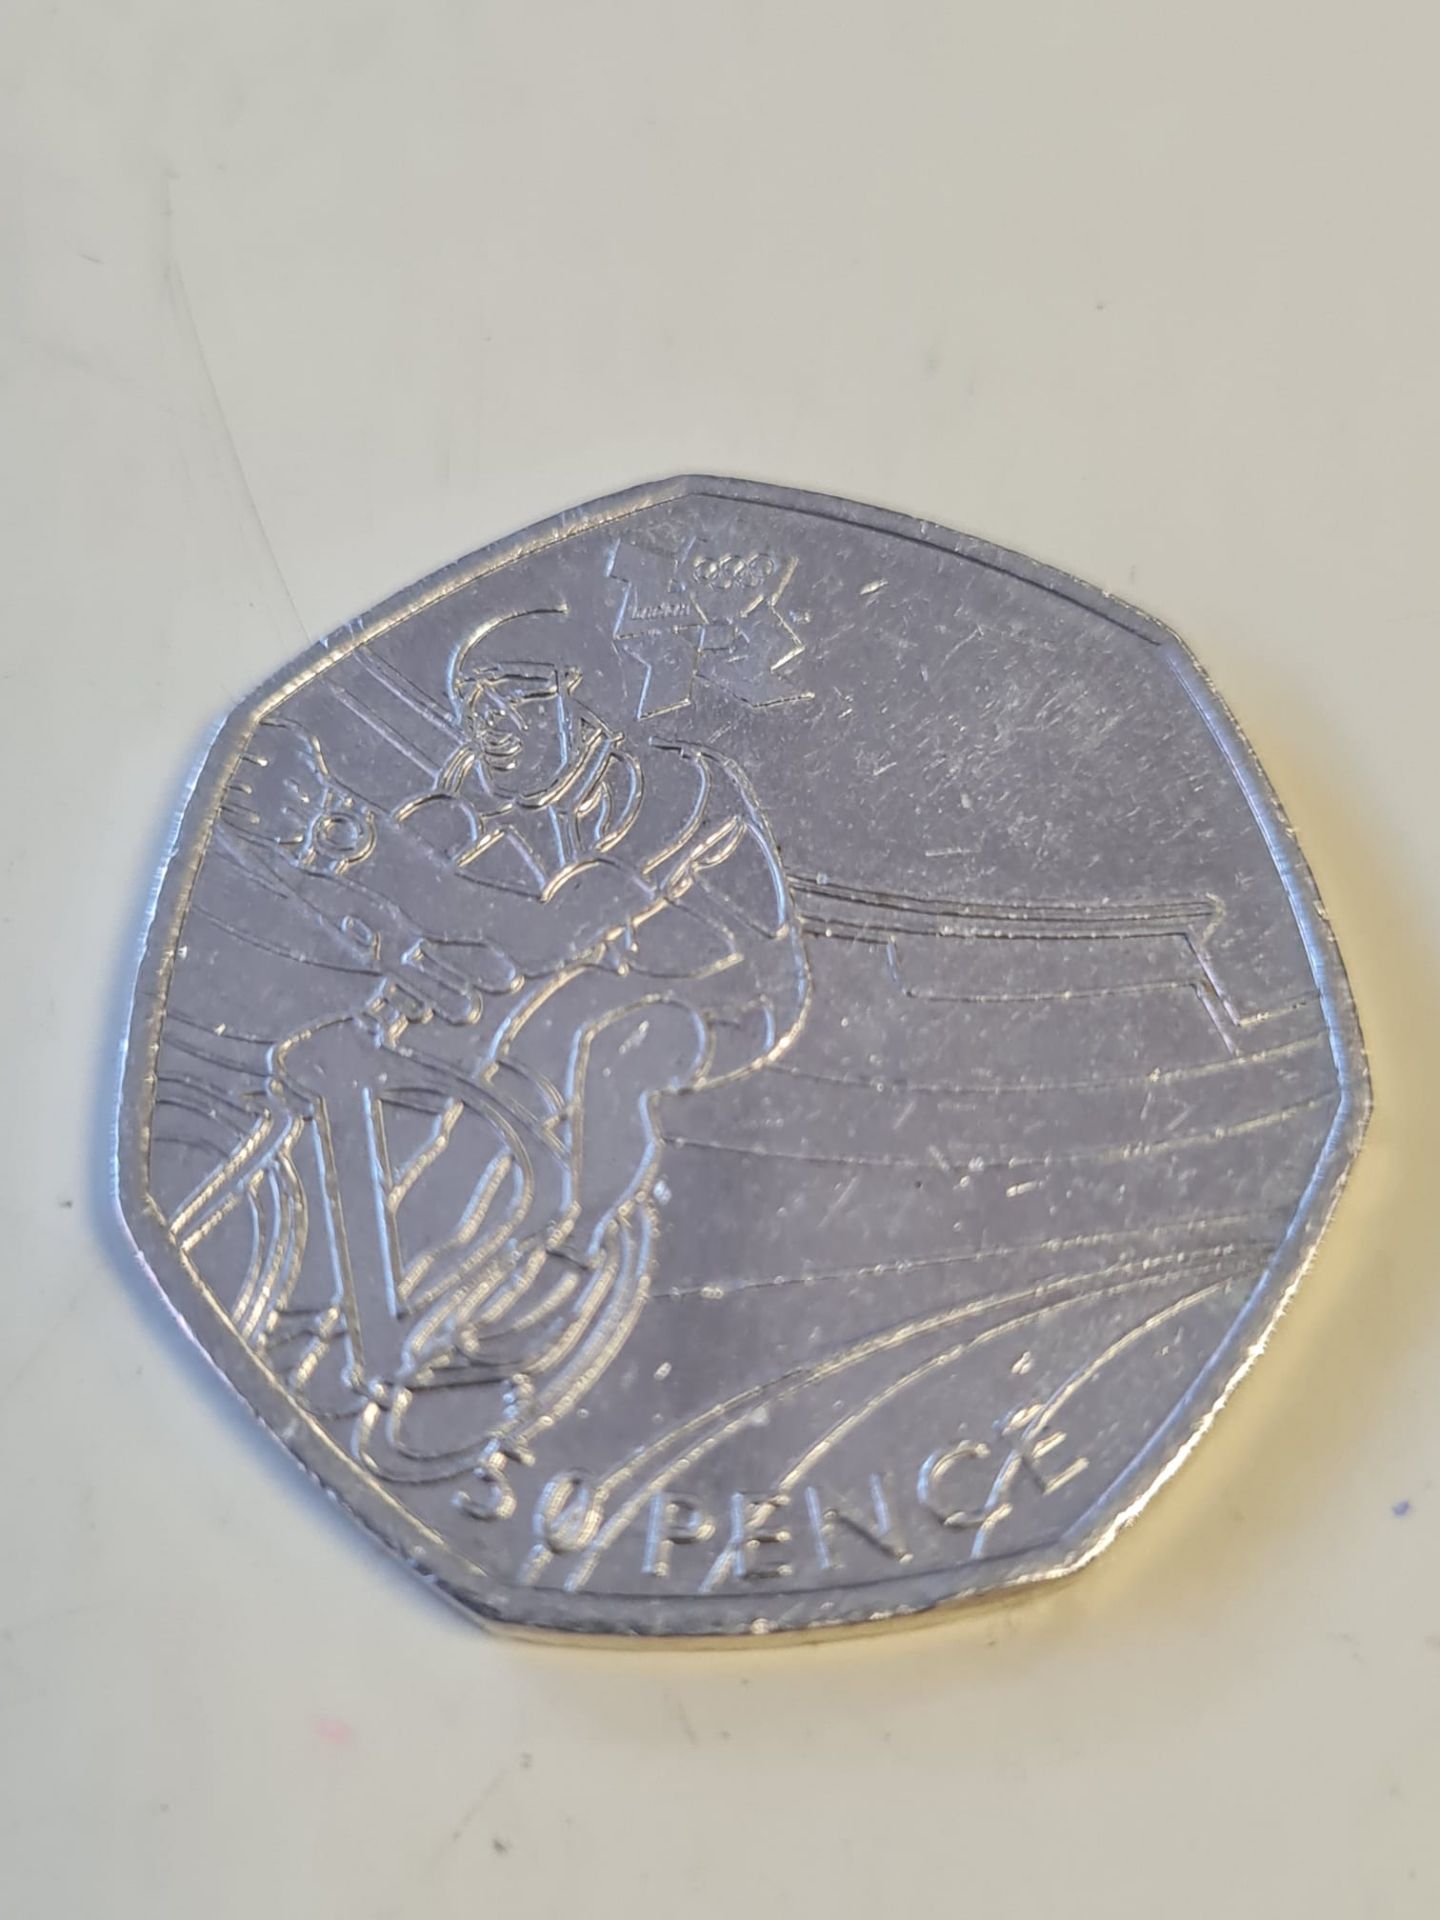 Collectors 50 p coin